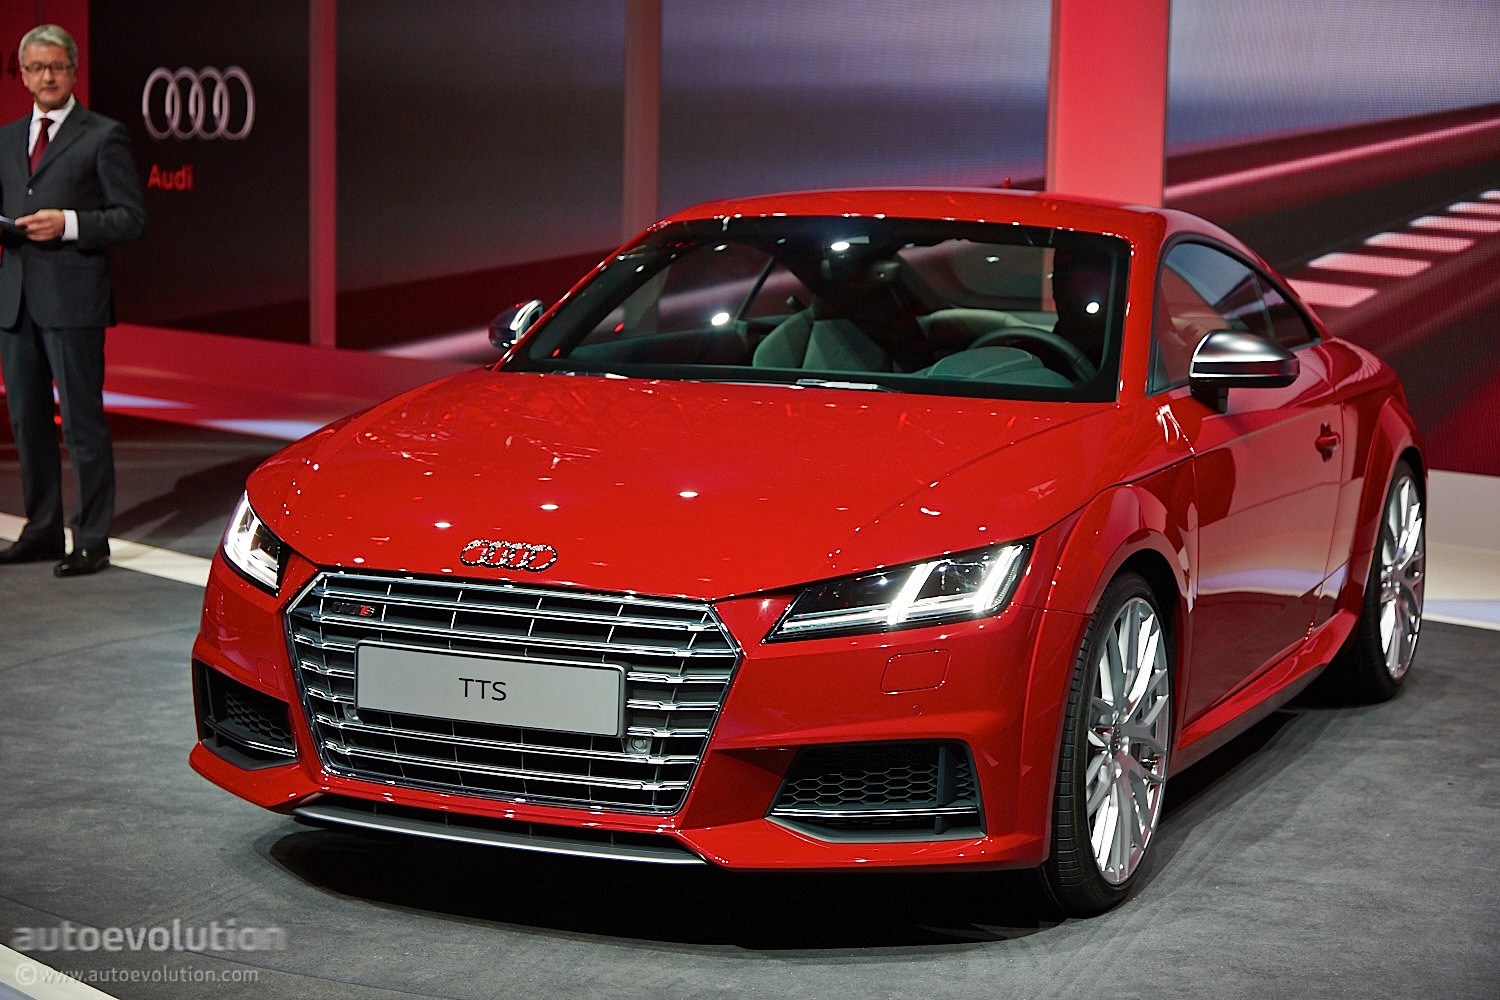 new-audi-tts-priced-at-49100-the-most-ex